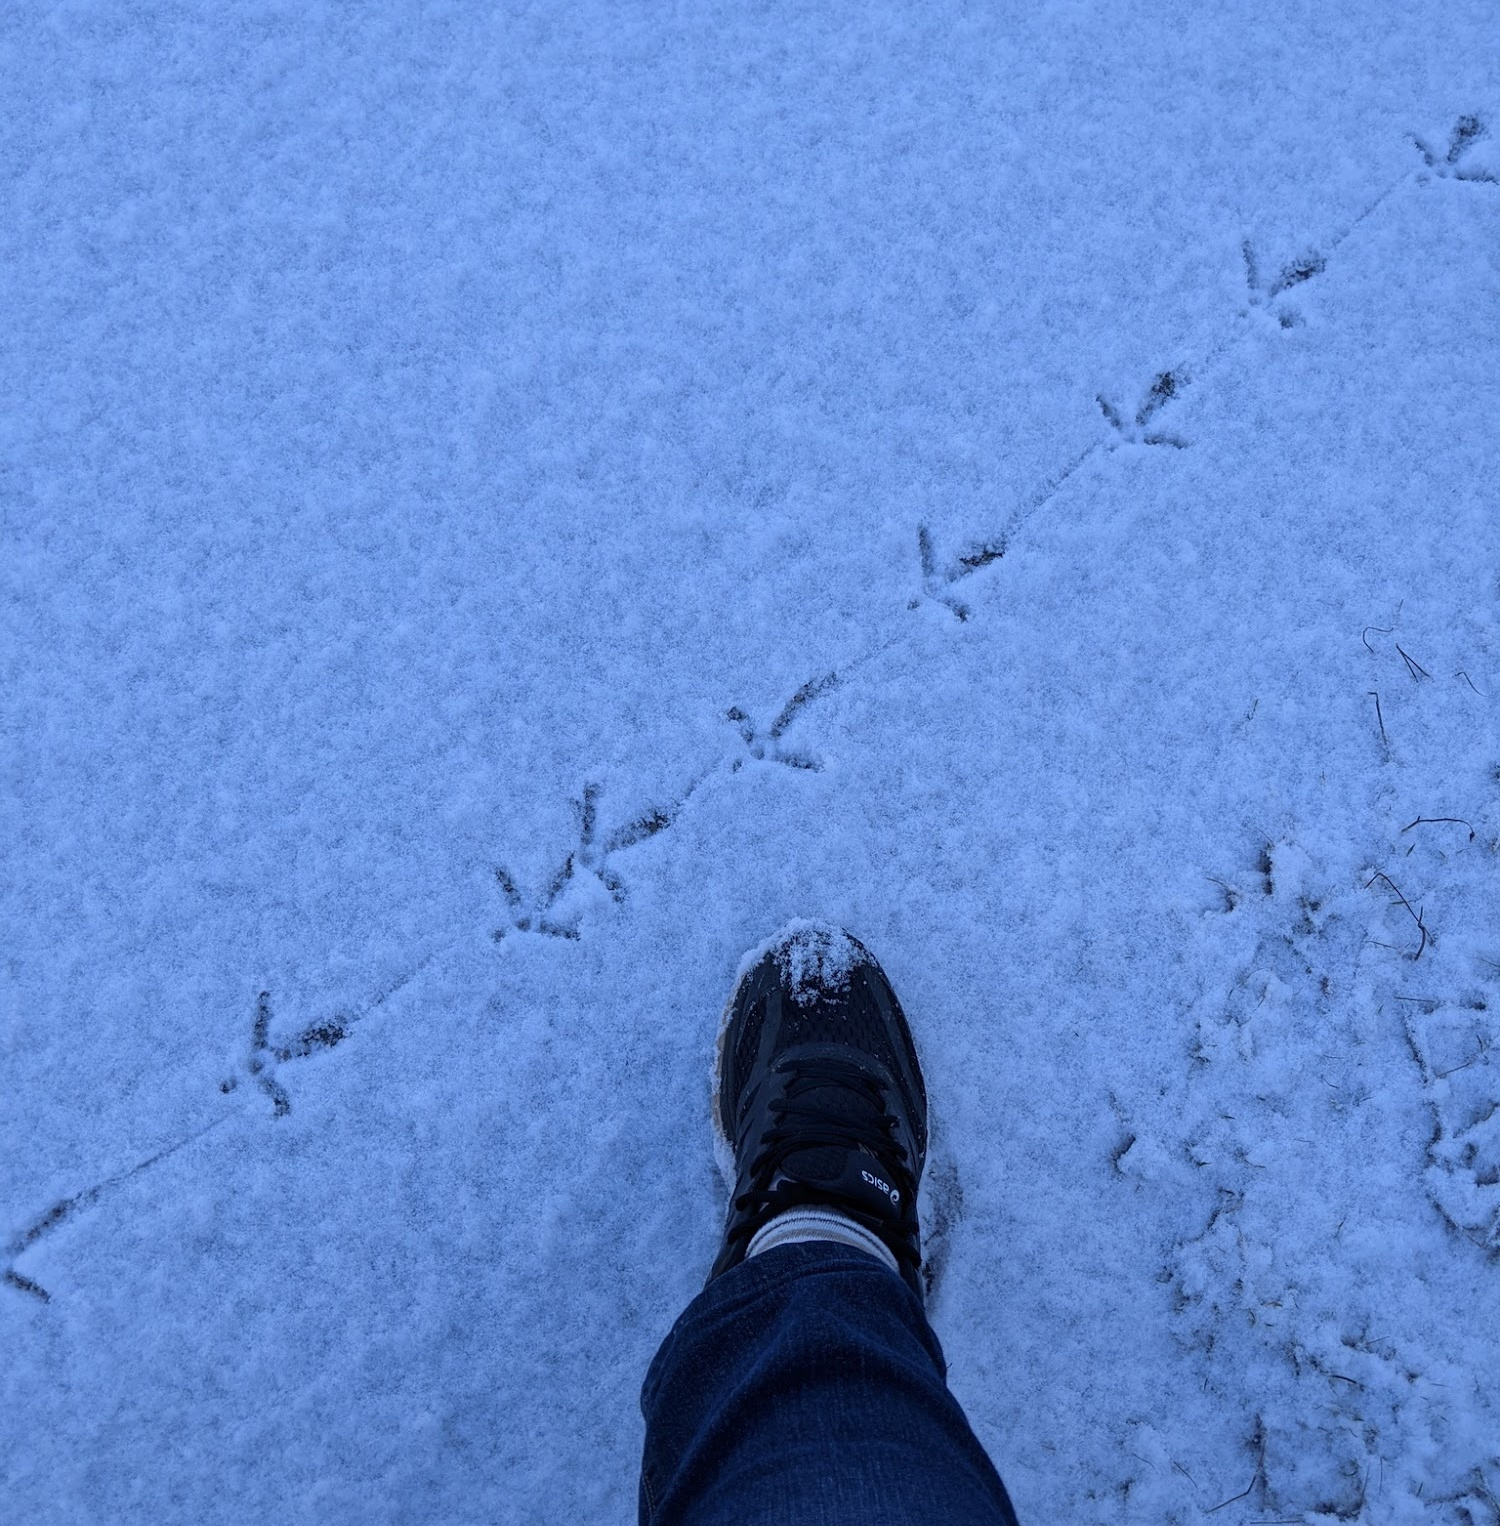 A trail of grouse tracks march through snow.